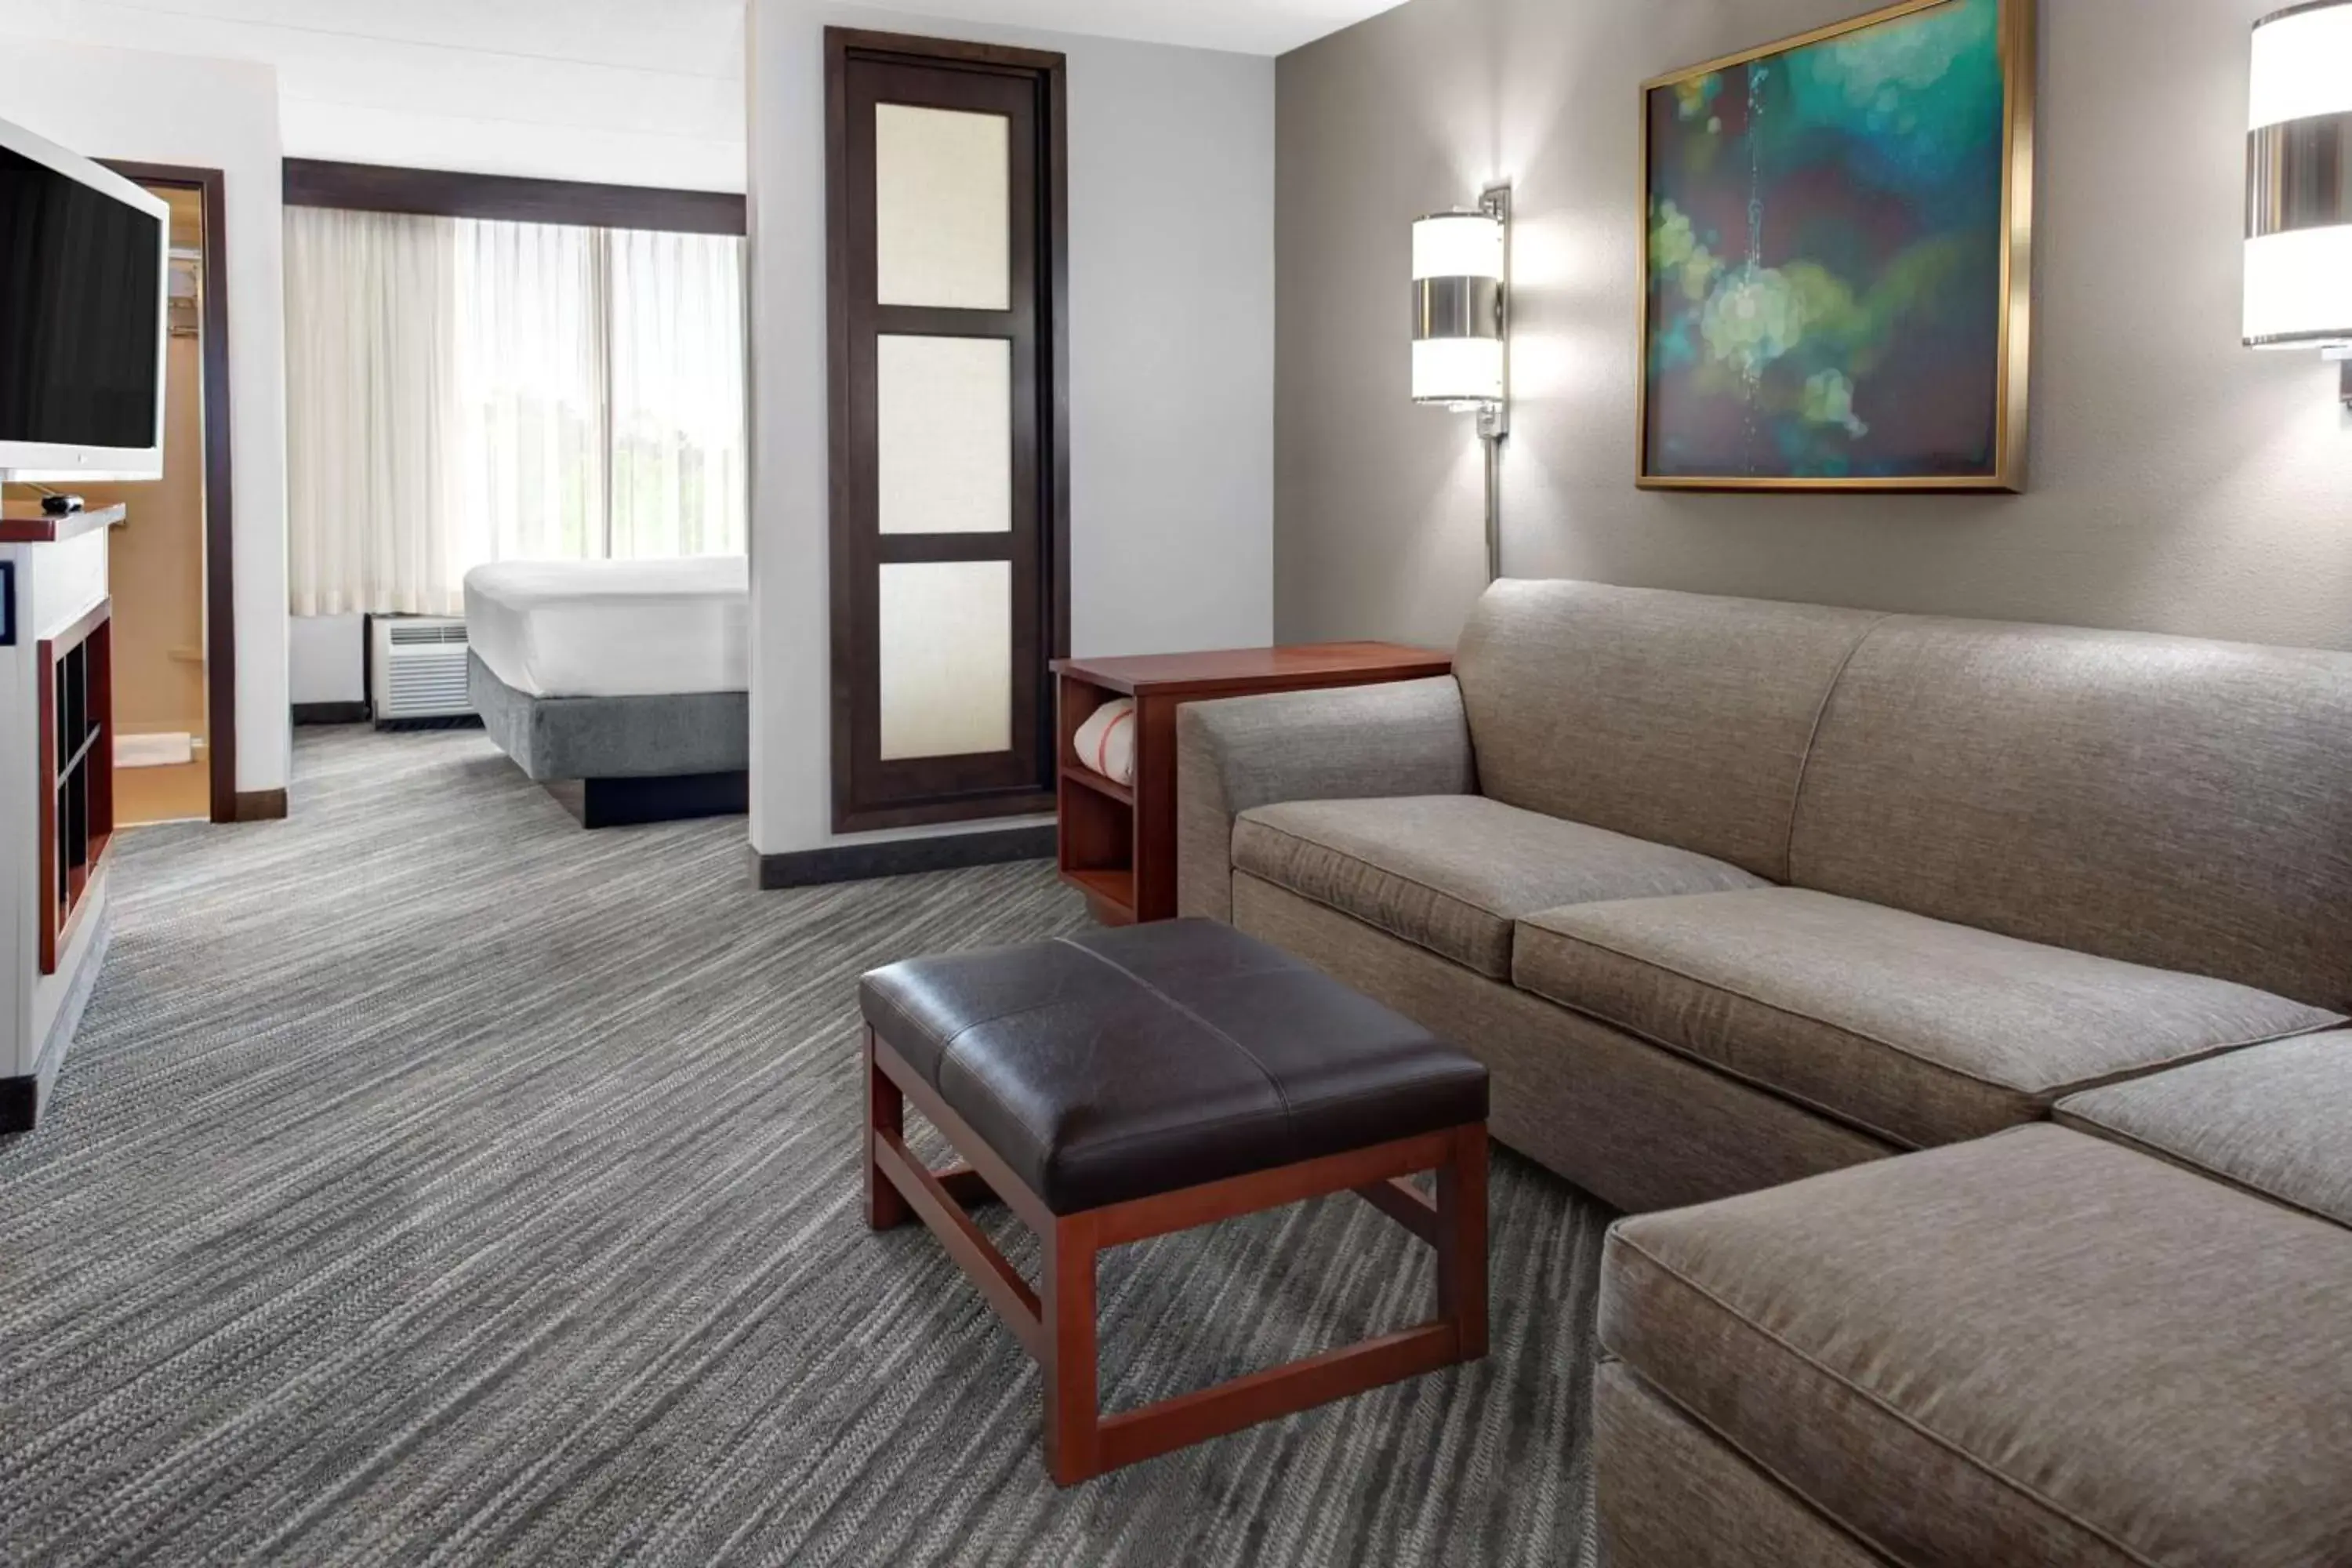 King Room with Sofa Bed in Hyatt Place Chicago/Itasca